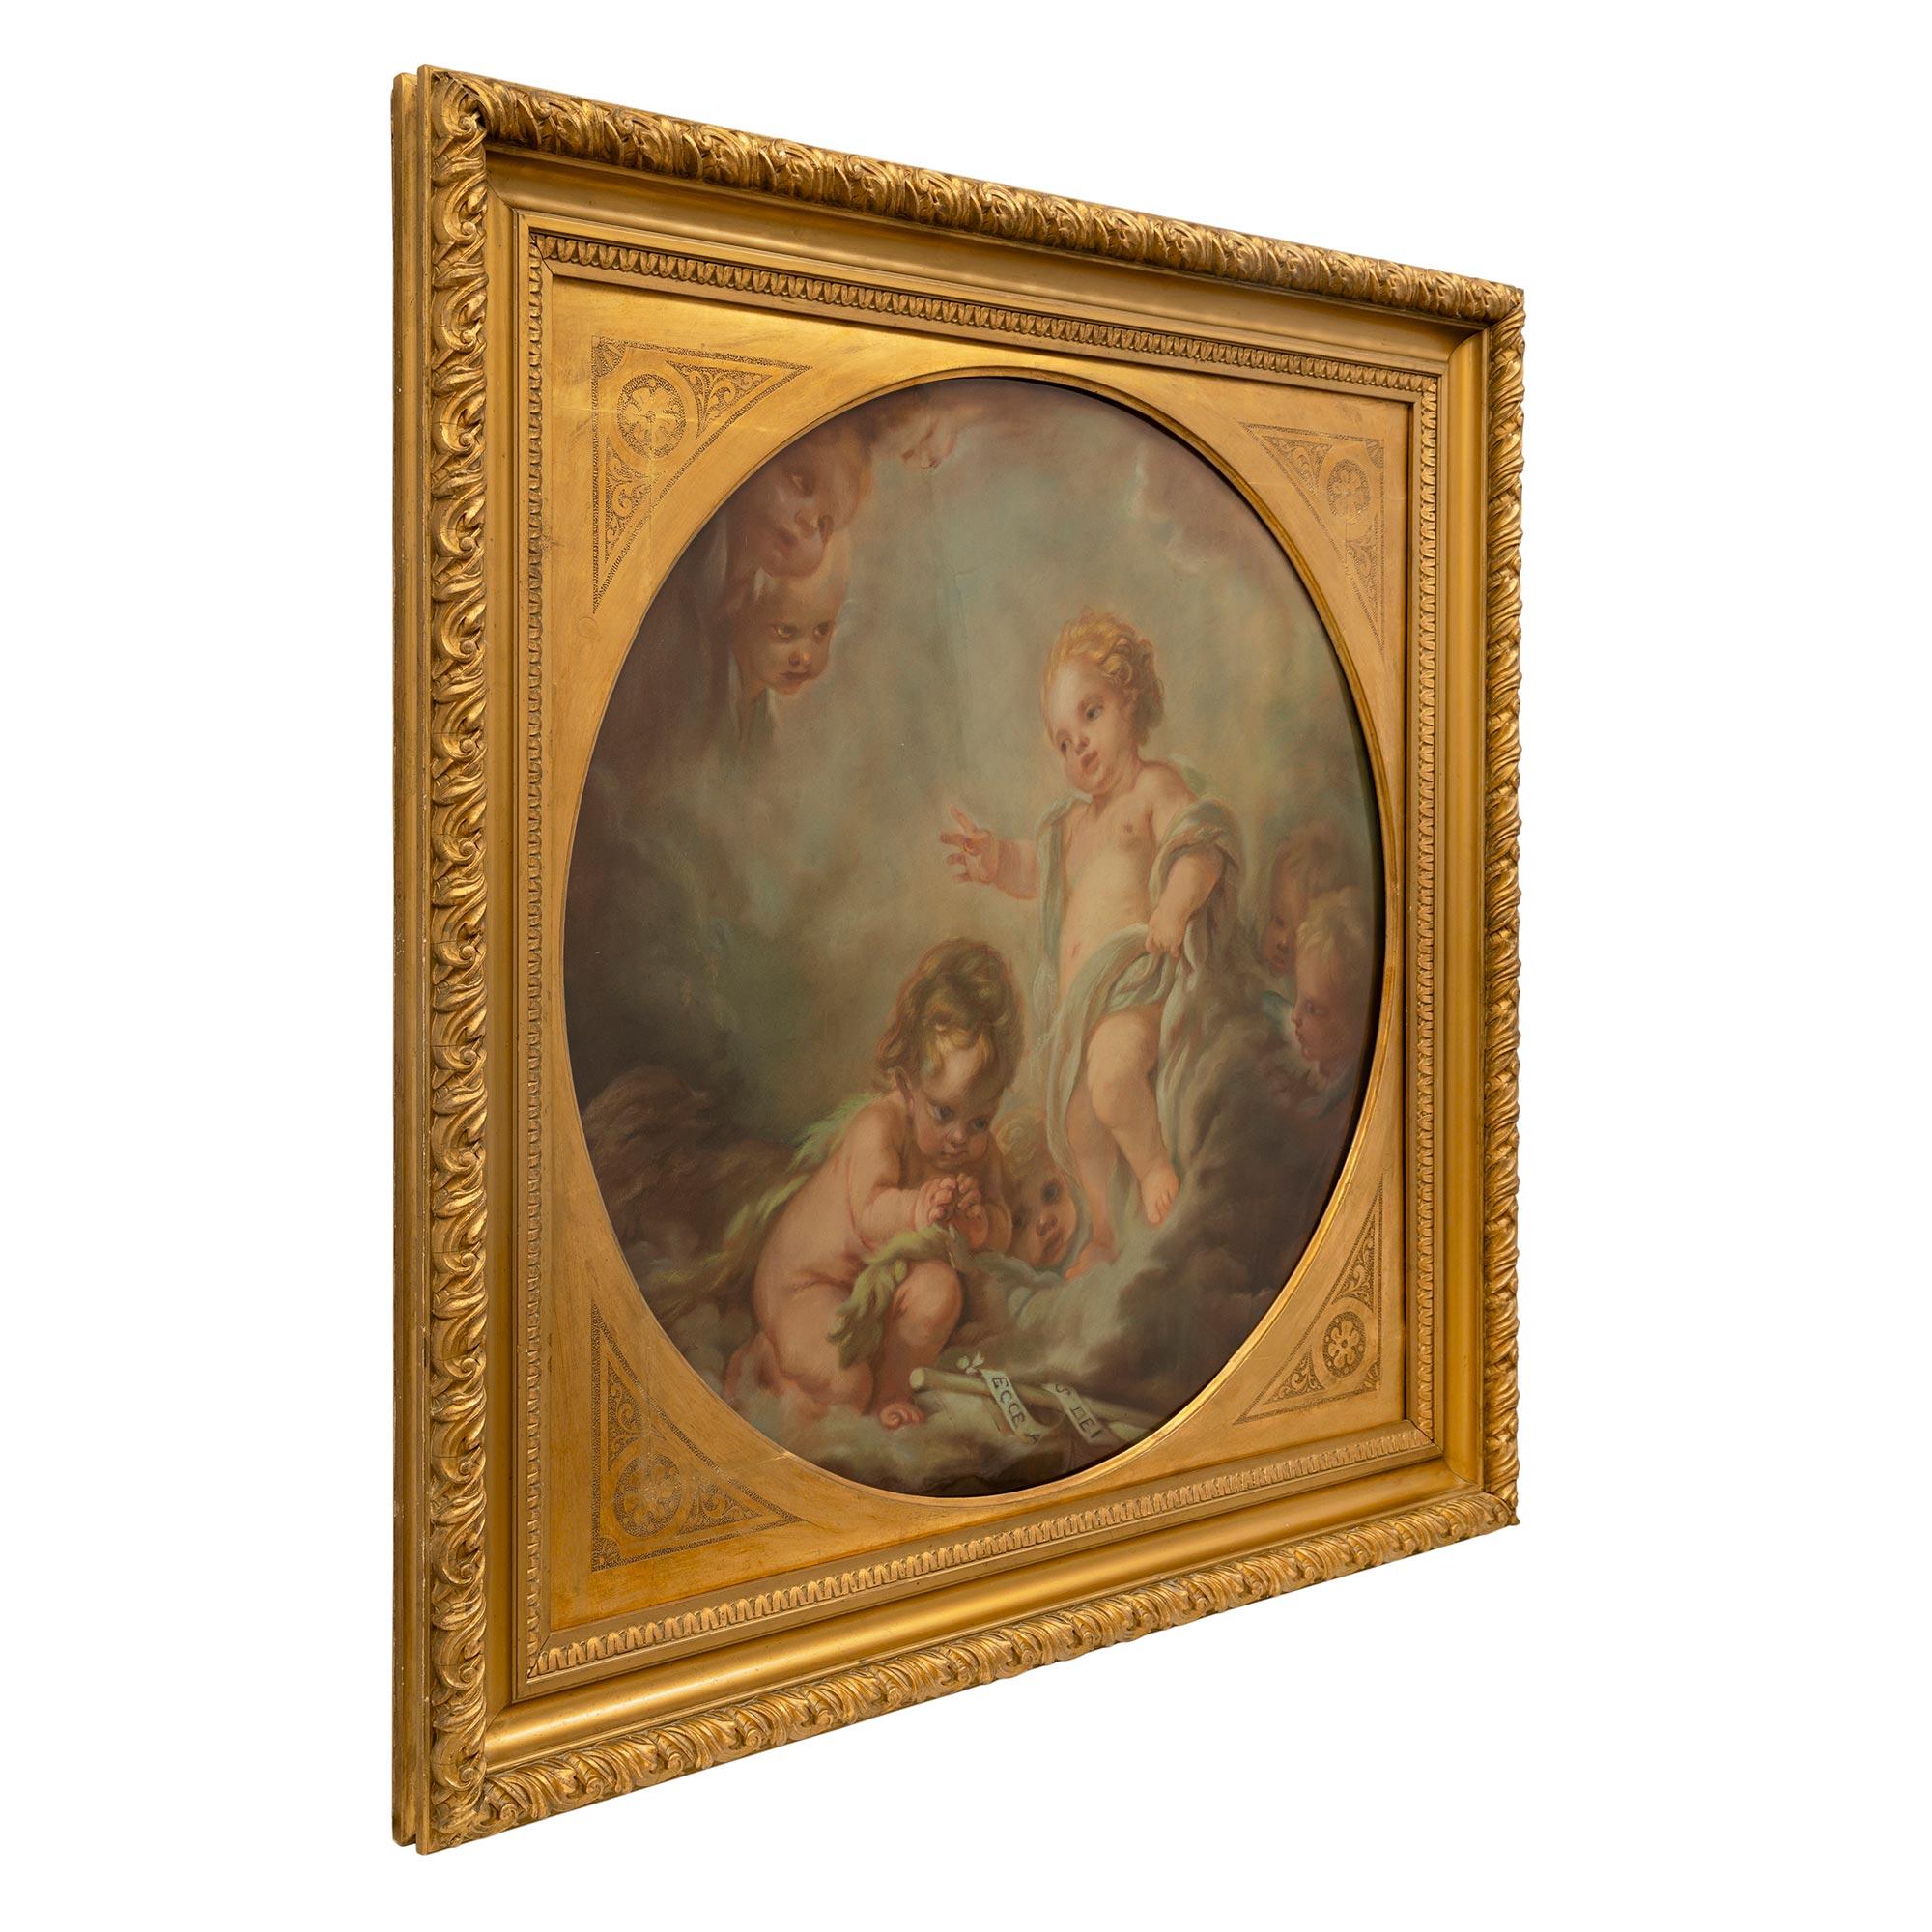 A wonderful large scale Continental 19th century signed pastel within a giltwood frame. The pastel depicts playful adorable cherubs, frolicking in a reverie. The square giltwood frame has a carved foliate outer border and fine etching designs at the